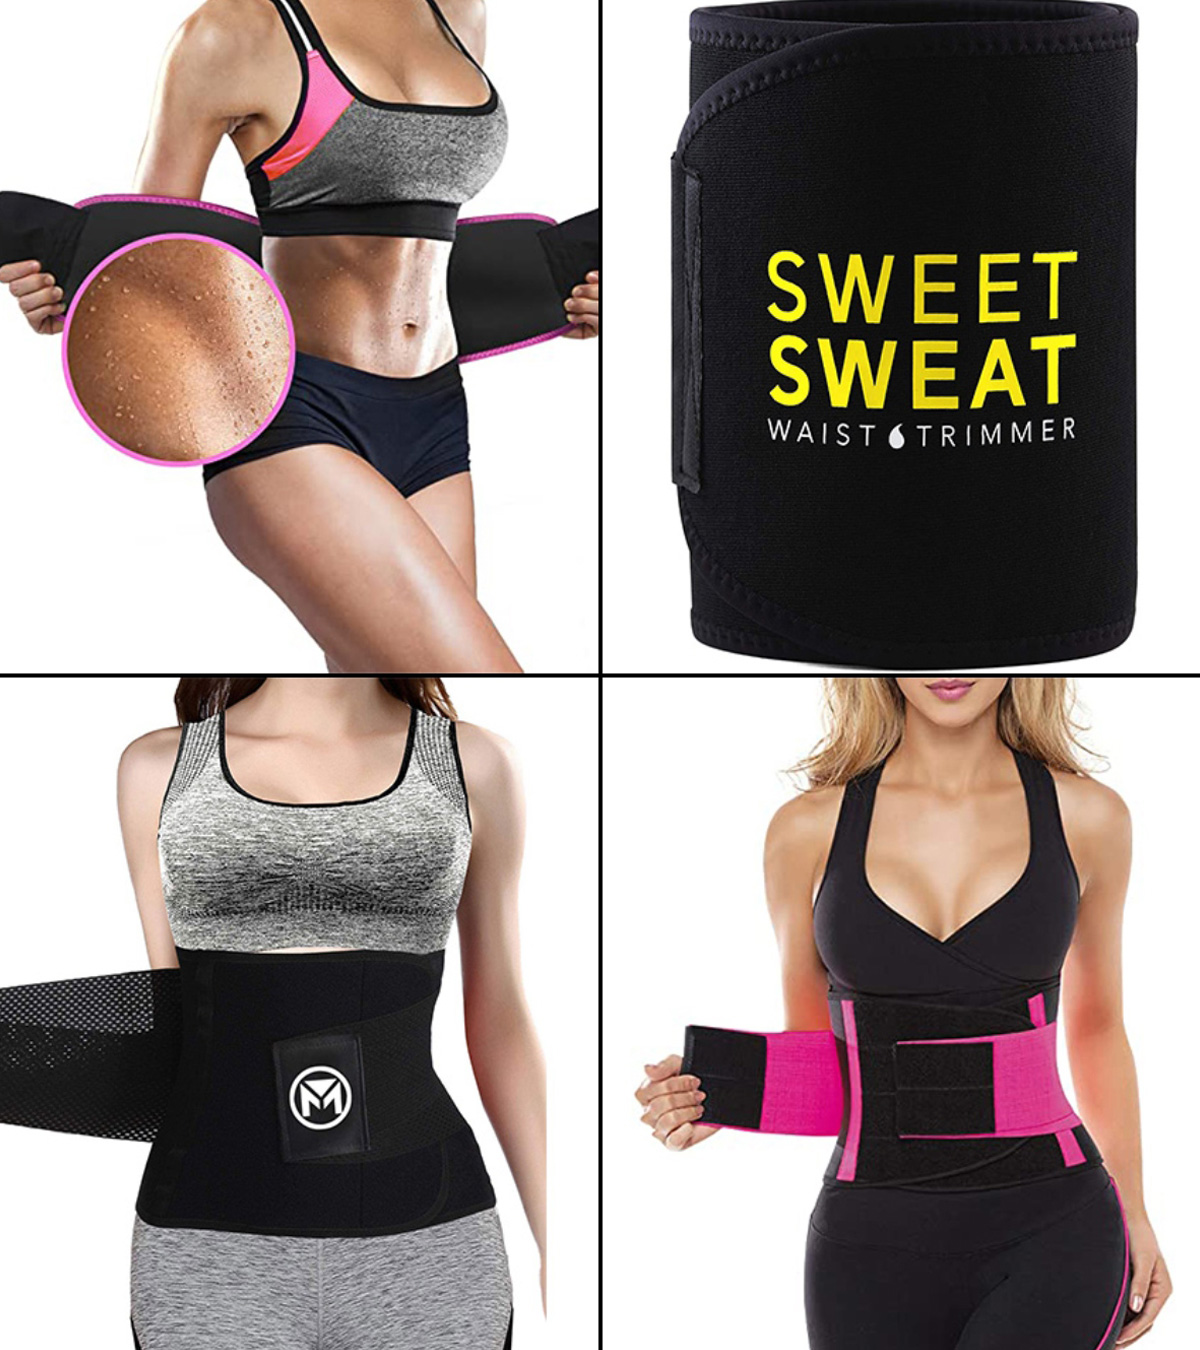 Enhance Your Workout with the Sweet Sweat Waist Trimmer